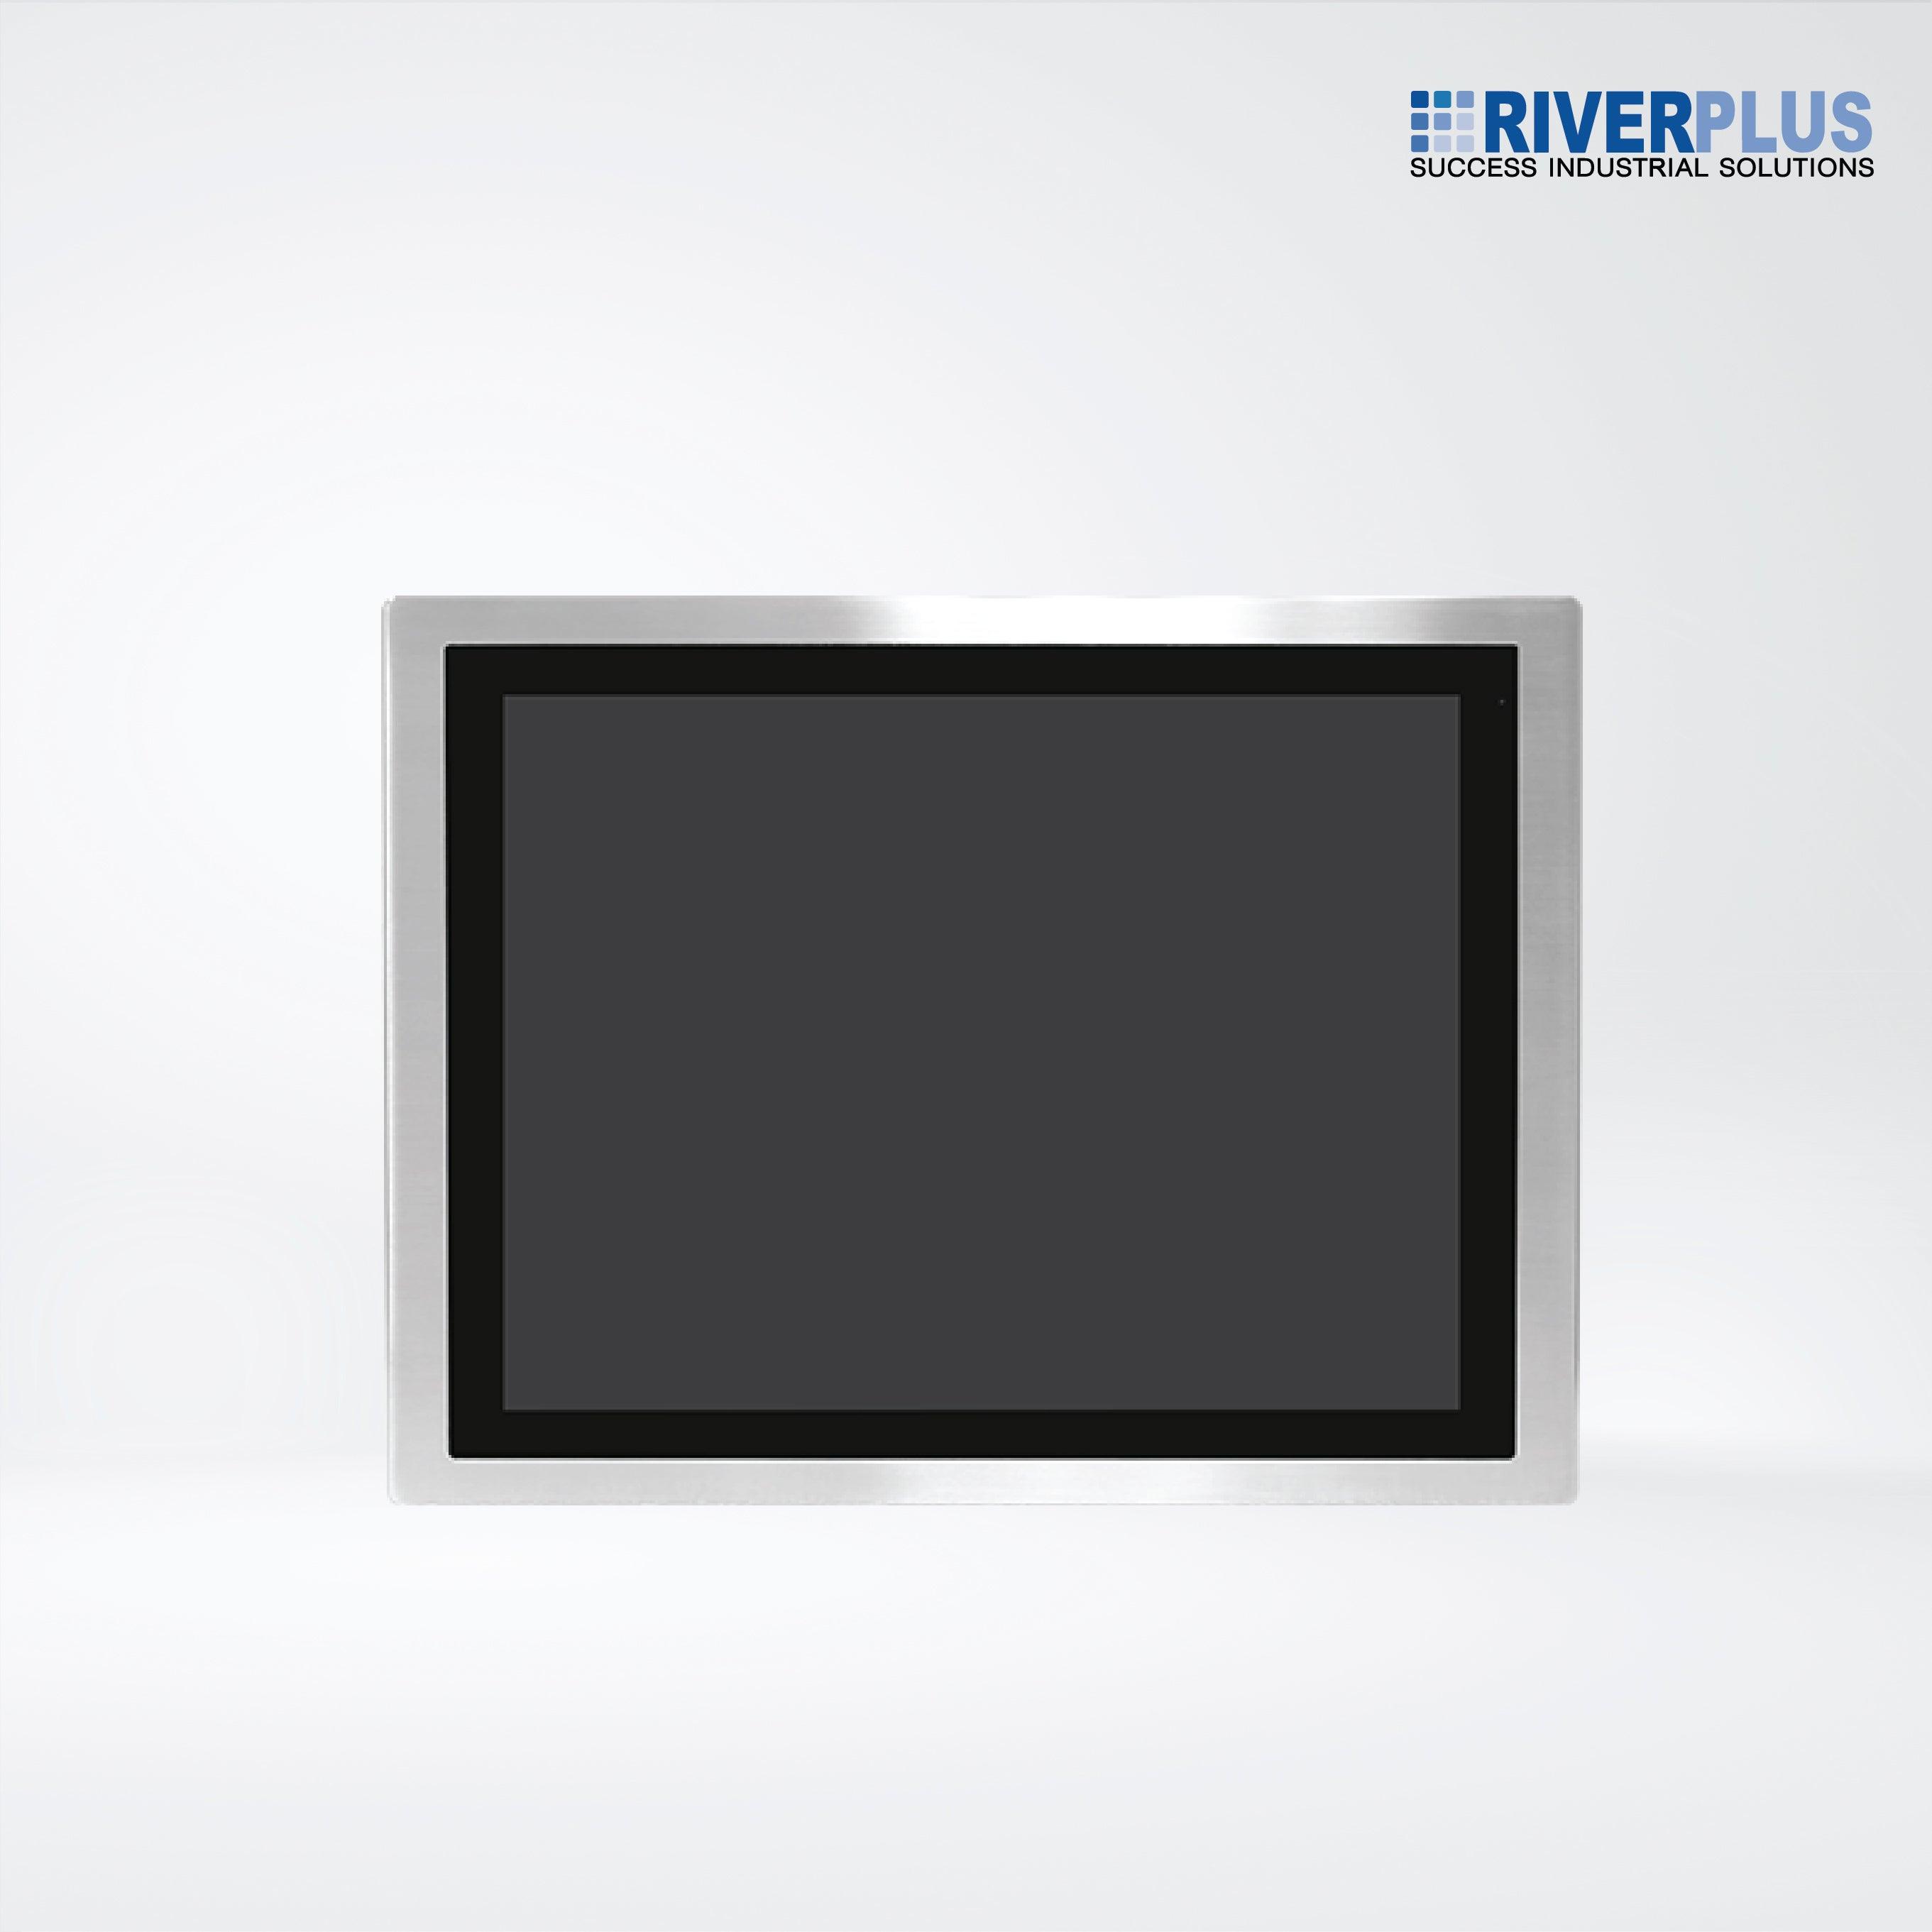 FABS-119GH 19” Flat Front Panel IP66 Stainless Chassis Display - Riverplus